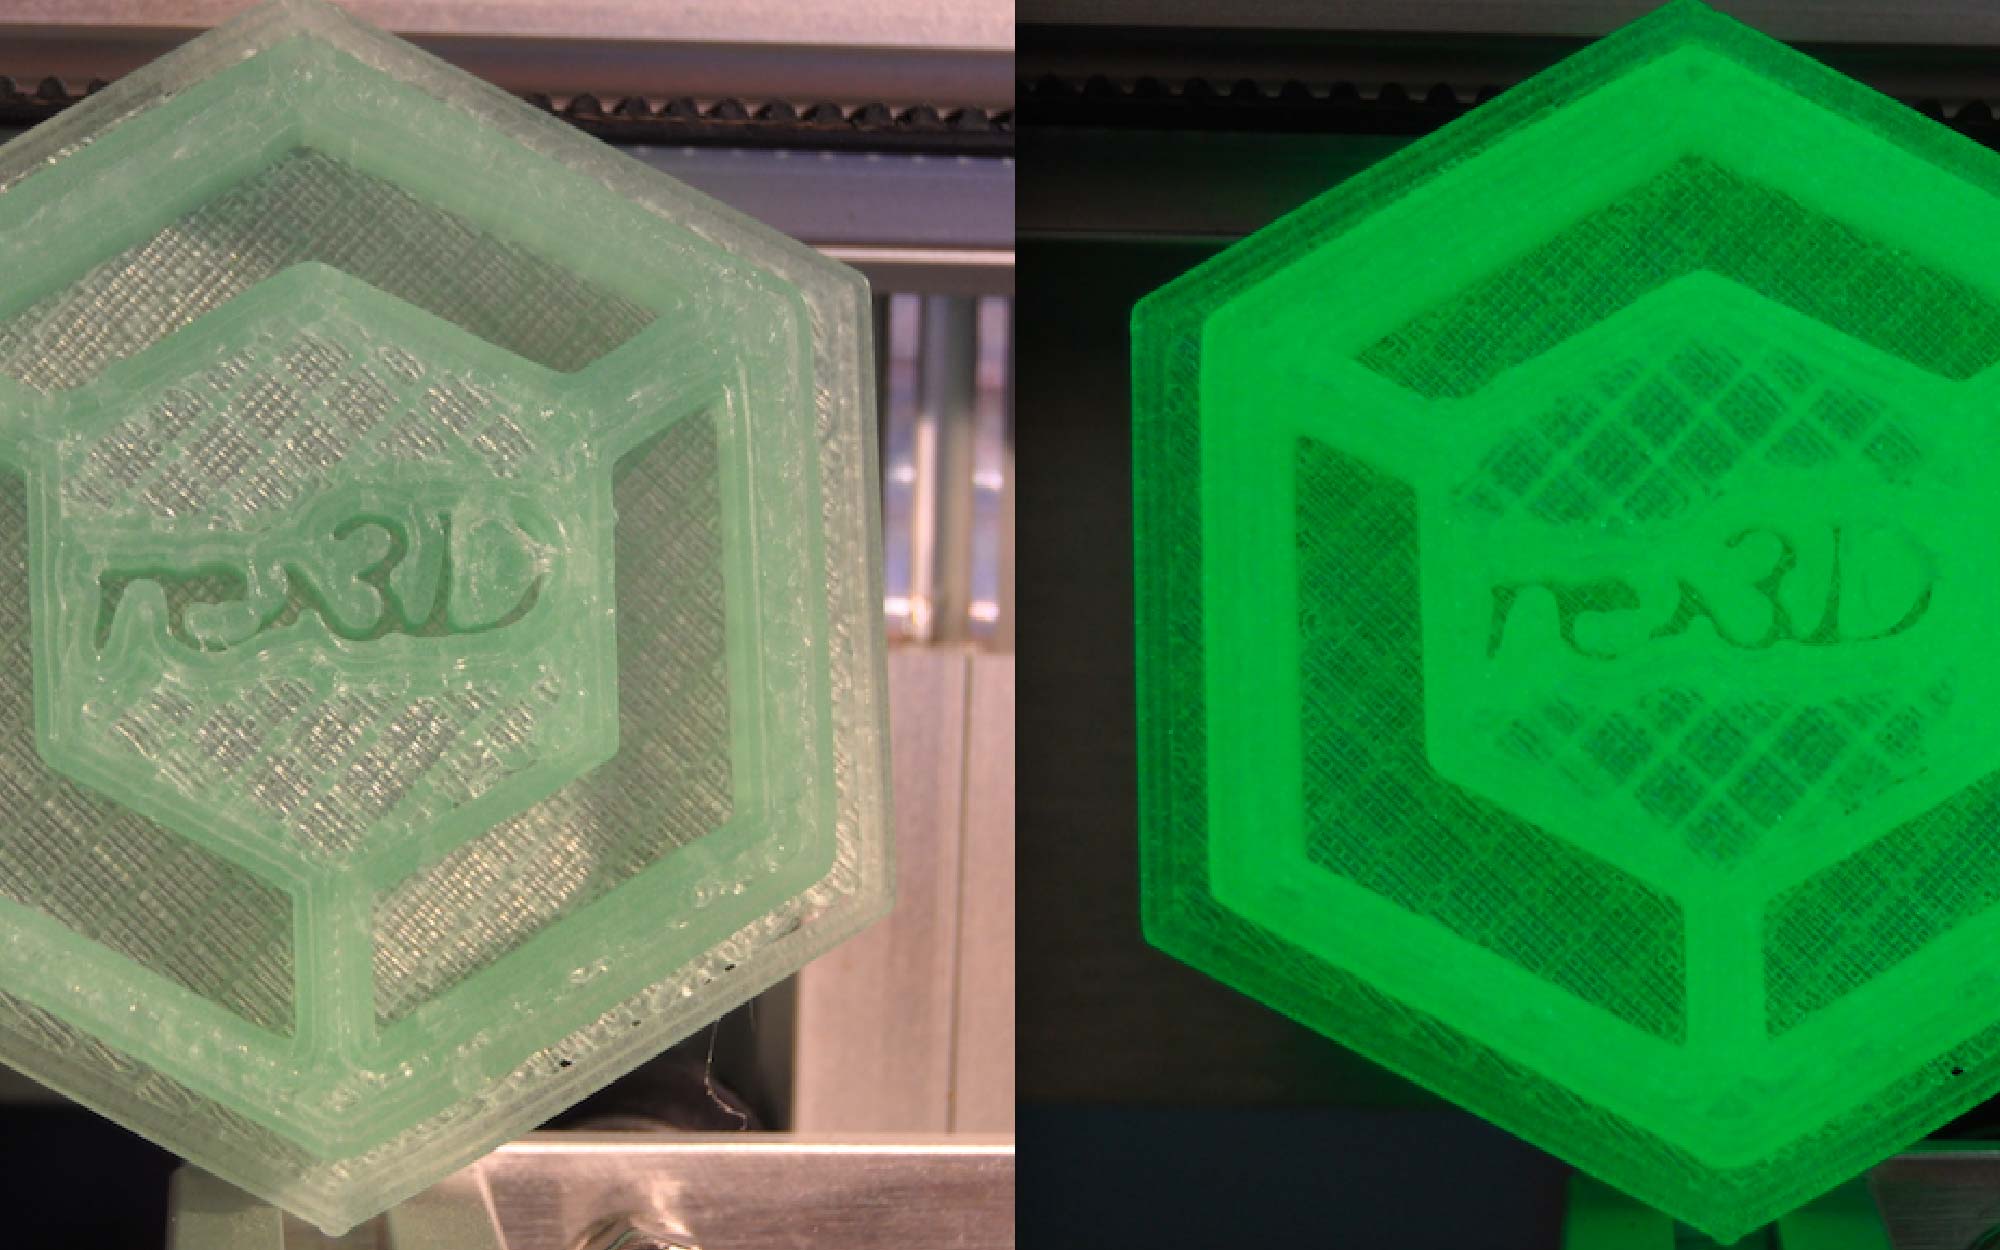 Download Turn Your Logo Into 3d Printed Awesomeness Re 3d Life Sized Affordable 3d Printing